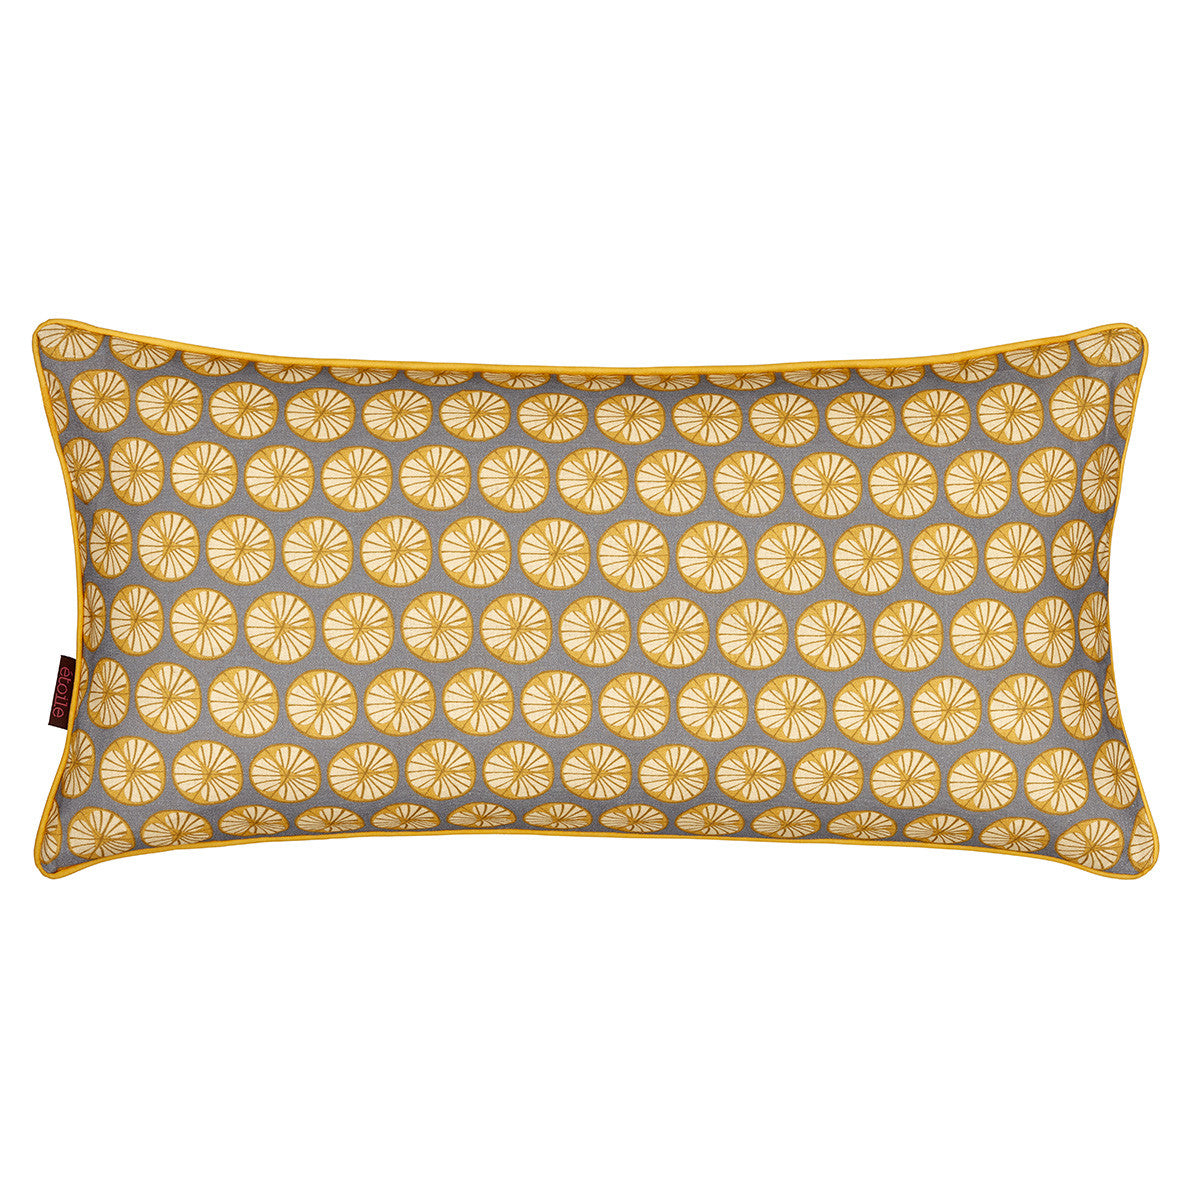 Graphic Fruit Cross Section Pattern Linen Union Printed Decorative Throw Pillow in Light Dove Grey and Saffron Yellow 12x24" 30x60cm